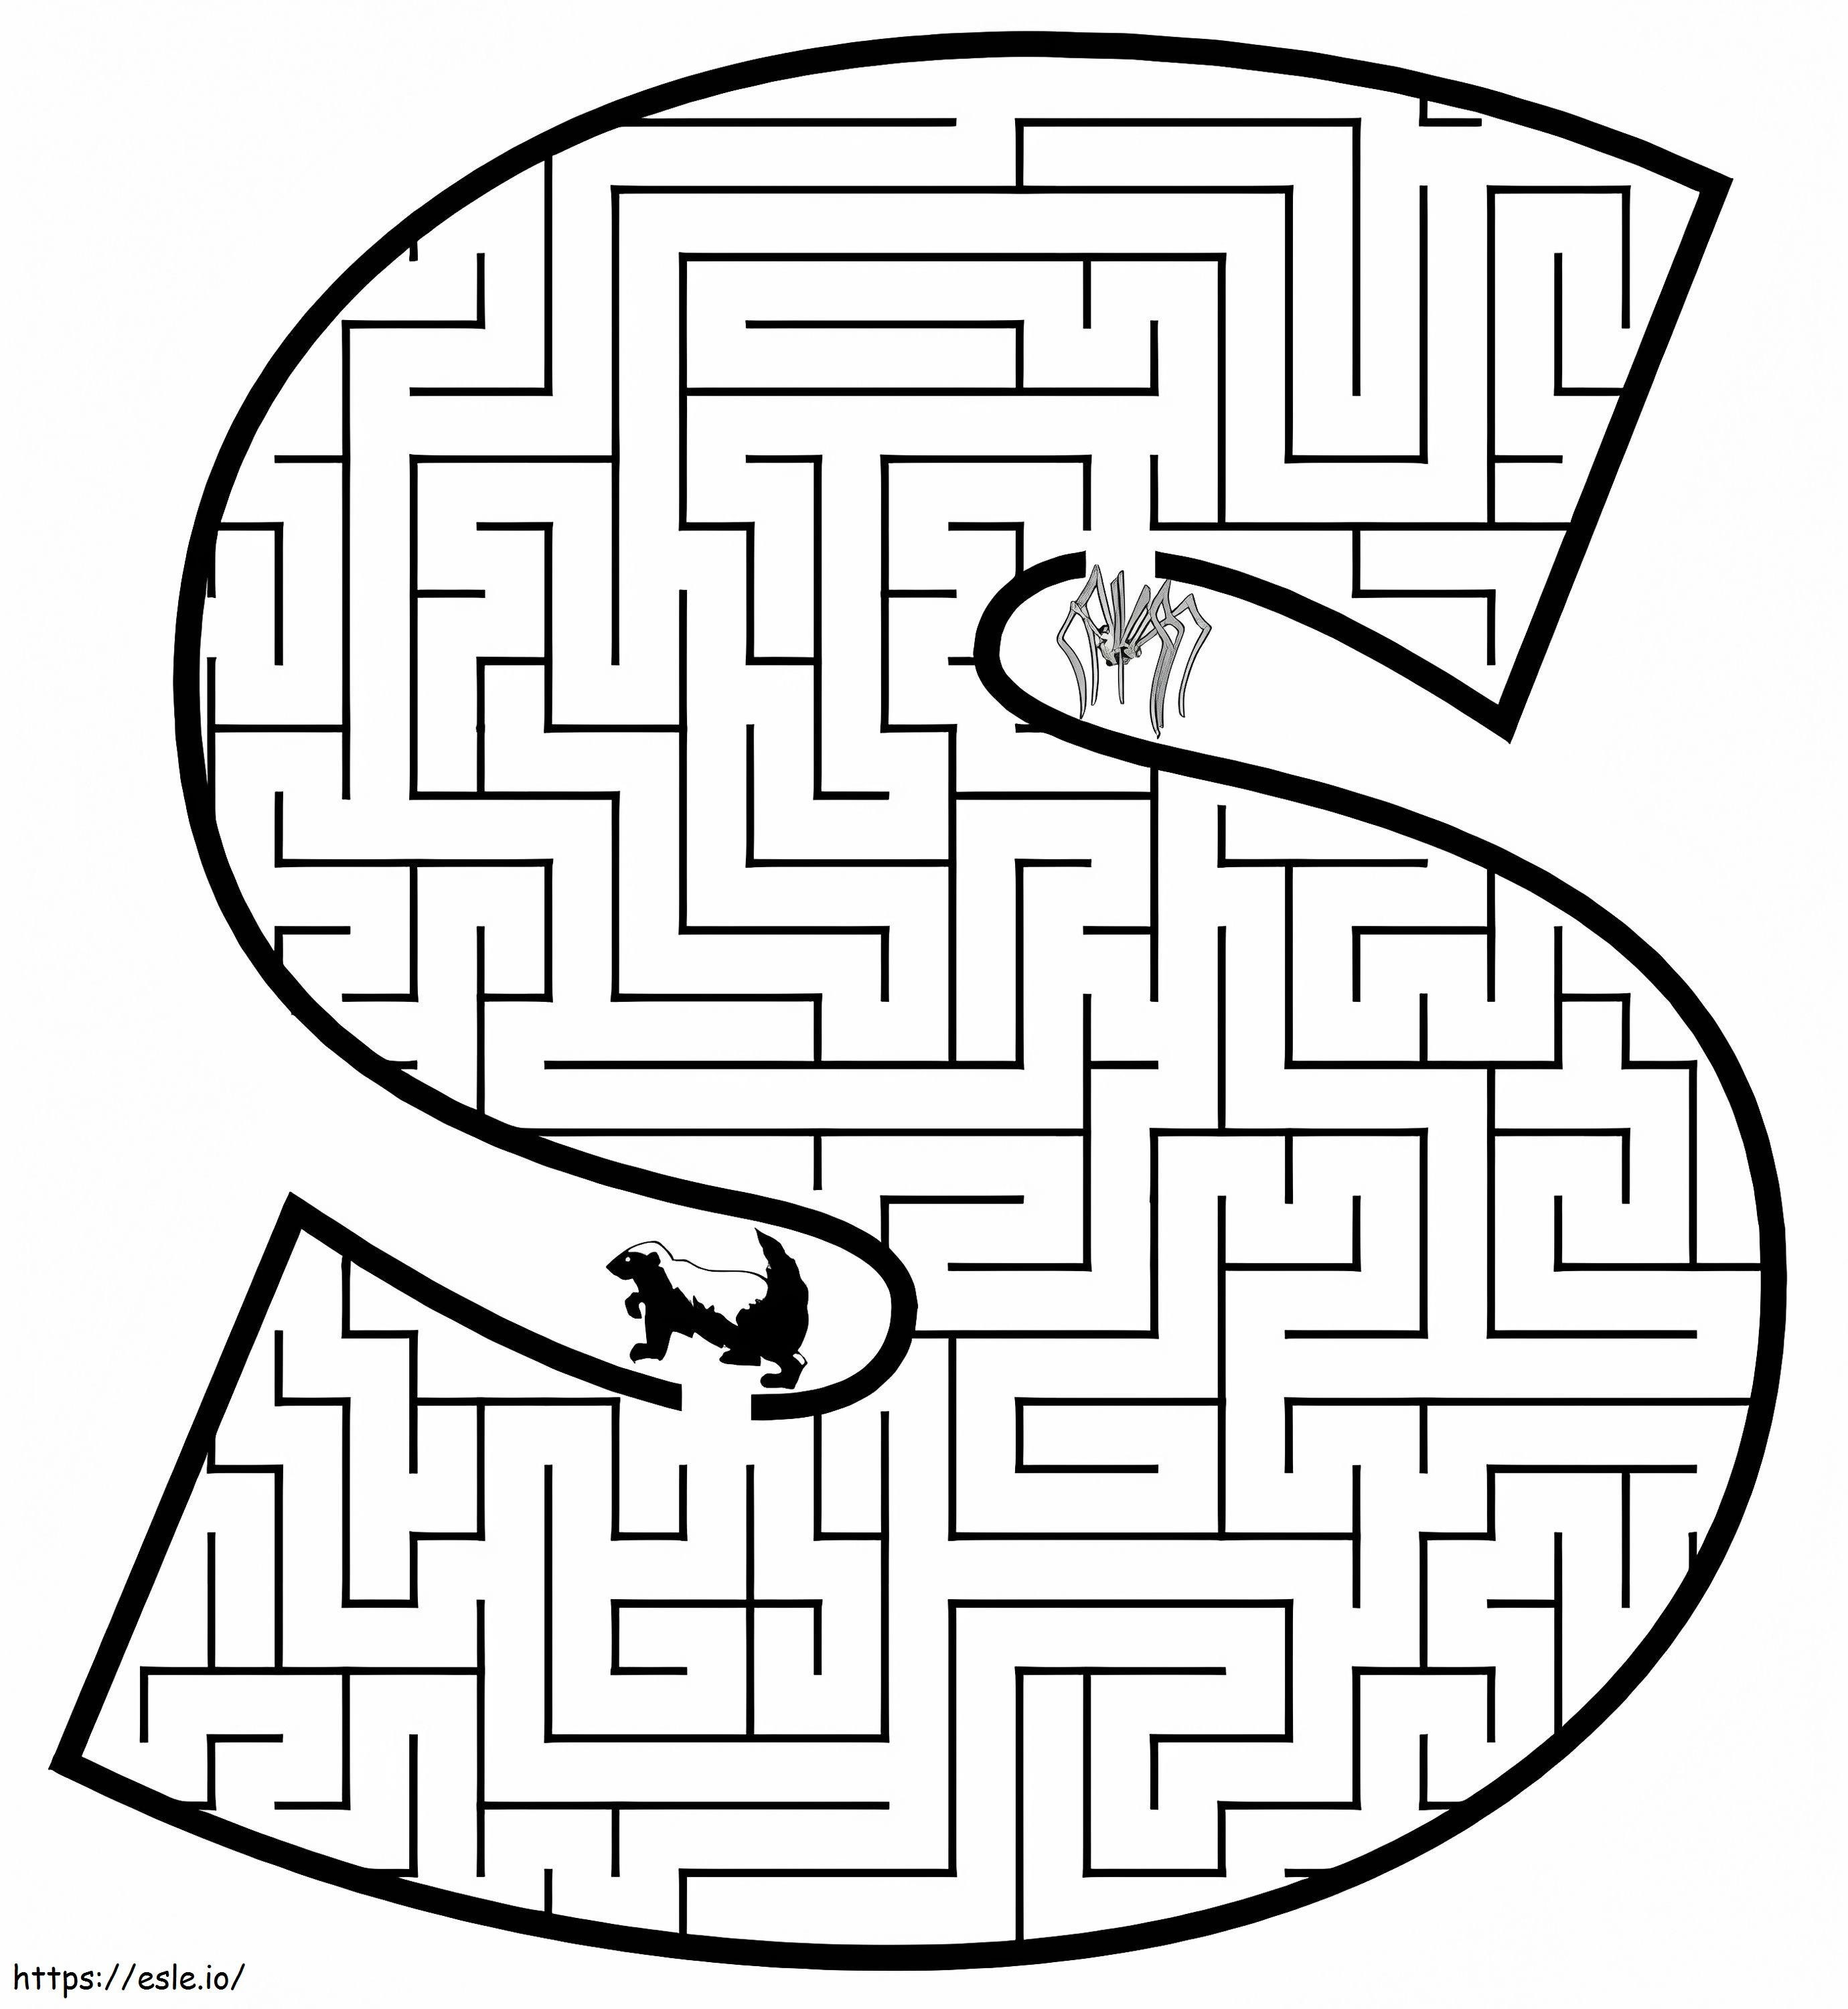 Letter S Maze coloring page